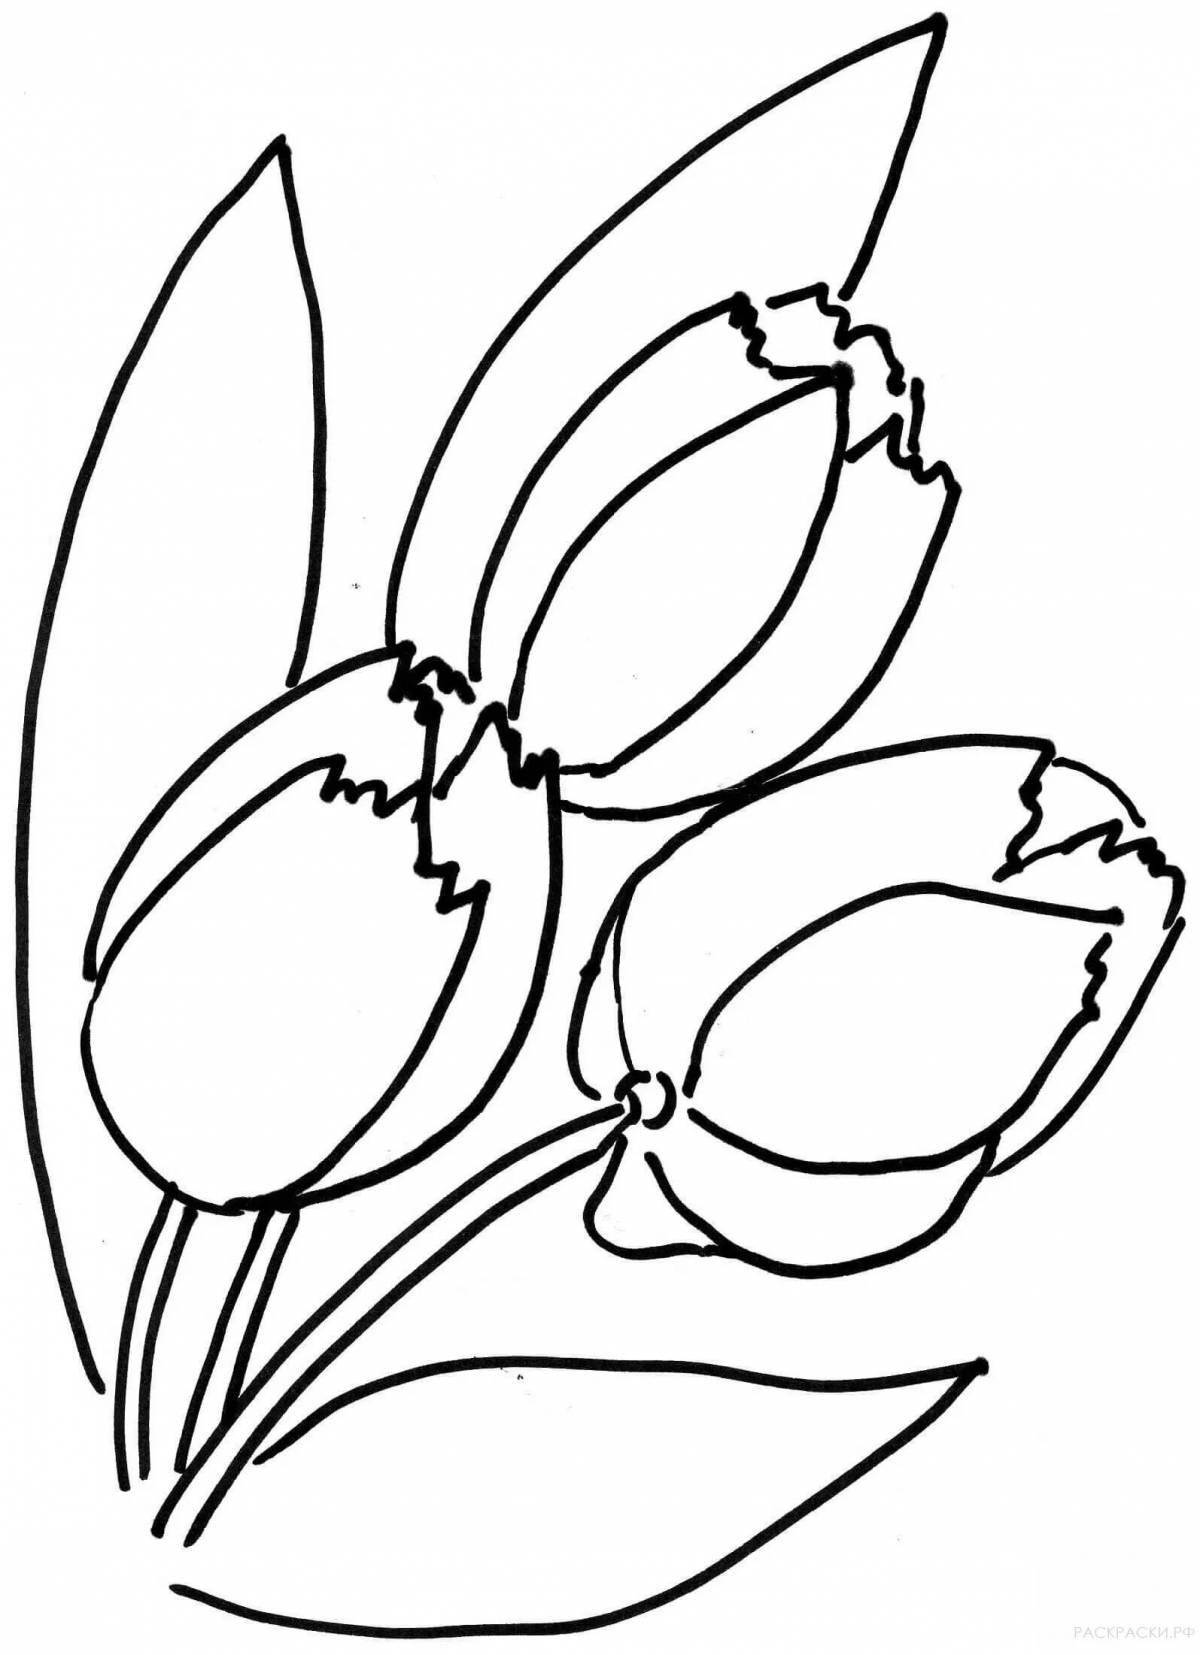 Shiny tulips March 8 coloring pages